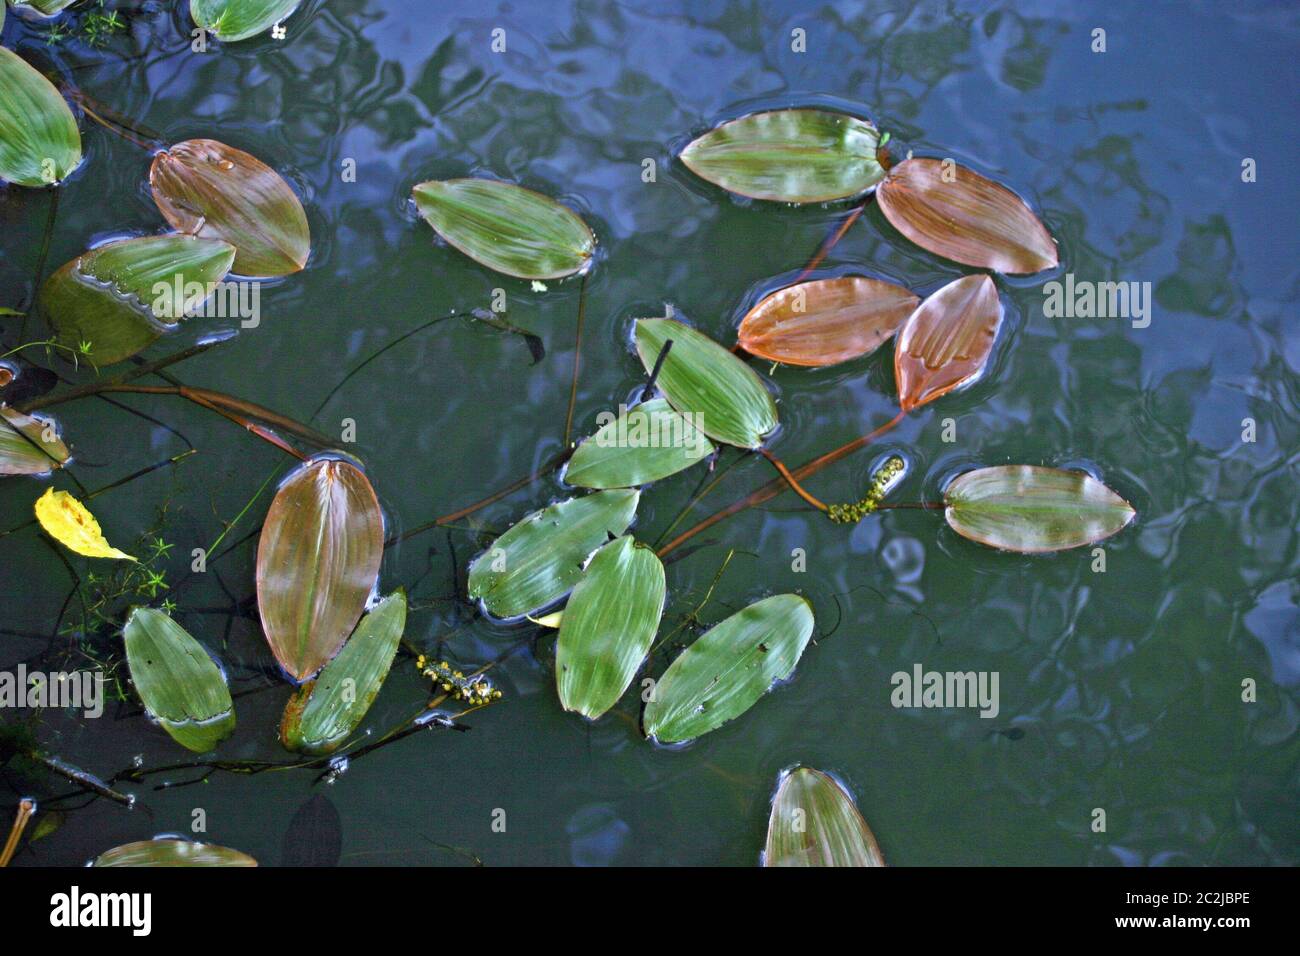 Close view of Broad-leaved pondweed (Potamogeton natans) floating leaves on a pond surface with reflections. Stock Photo